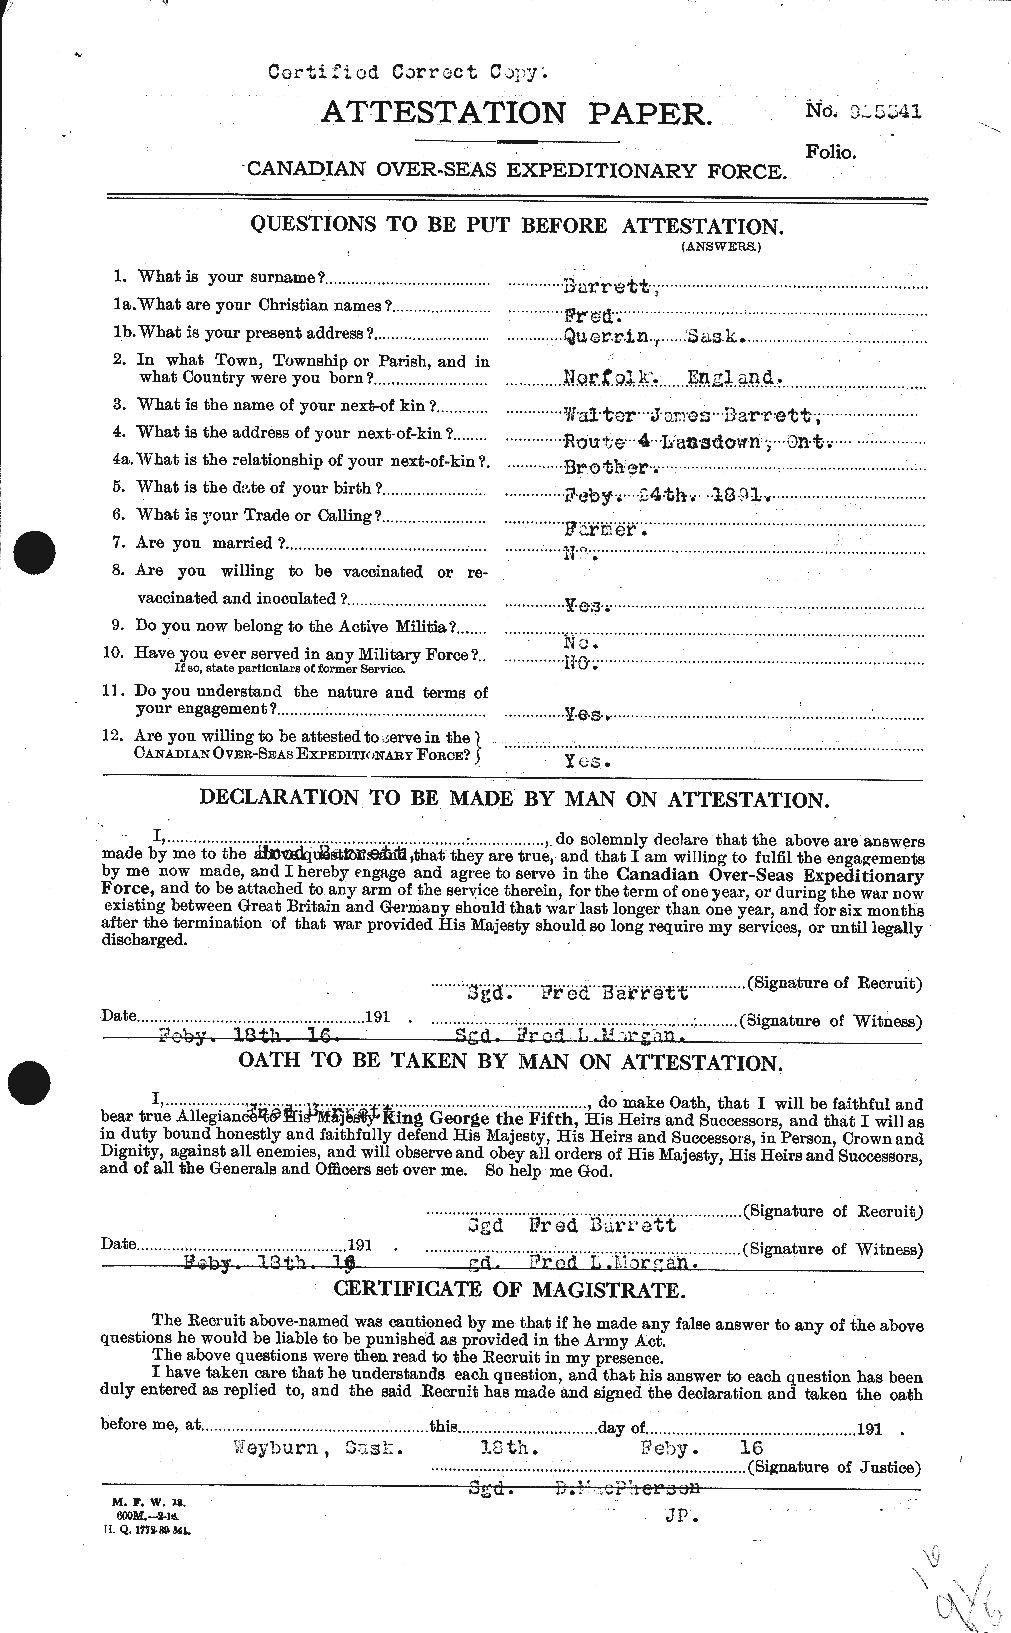 Personnel Records of the First World War - CEF 220336a